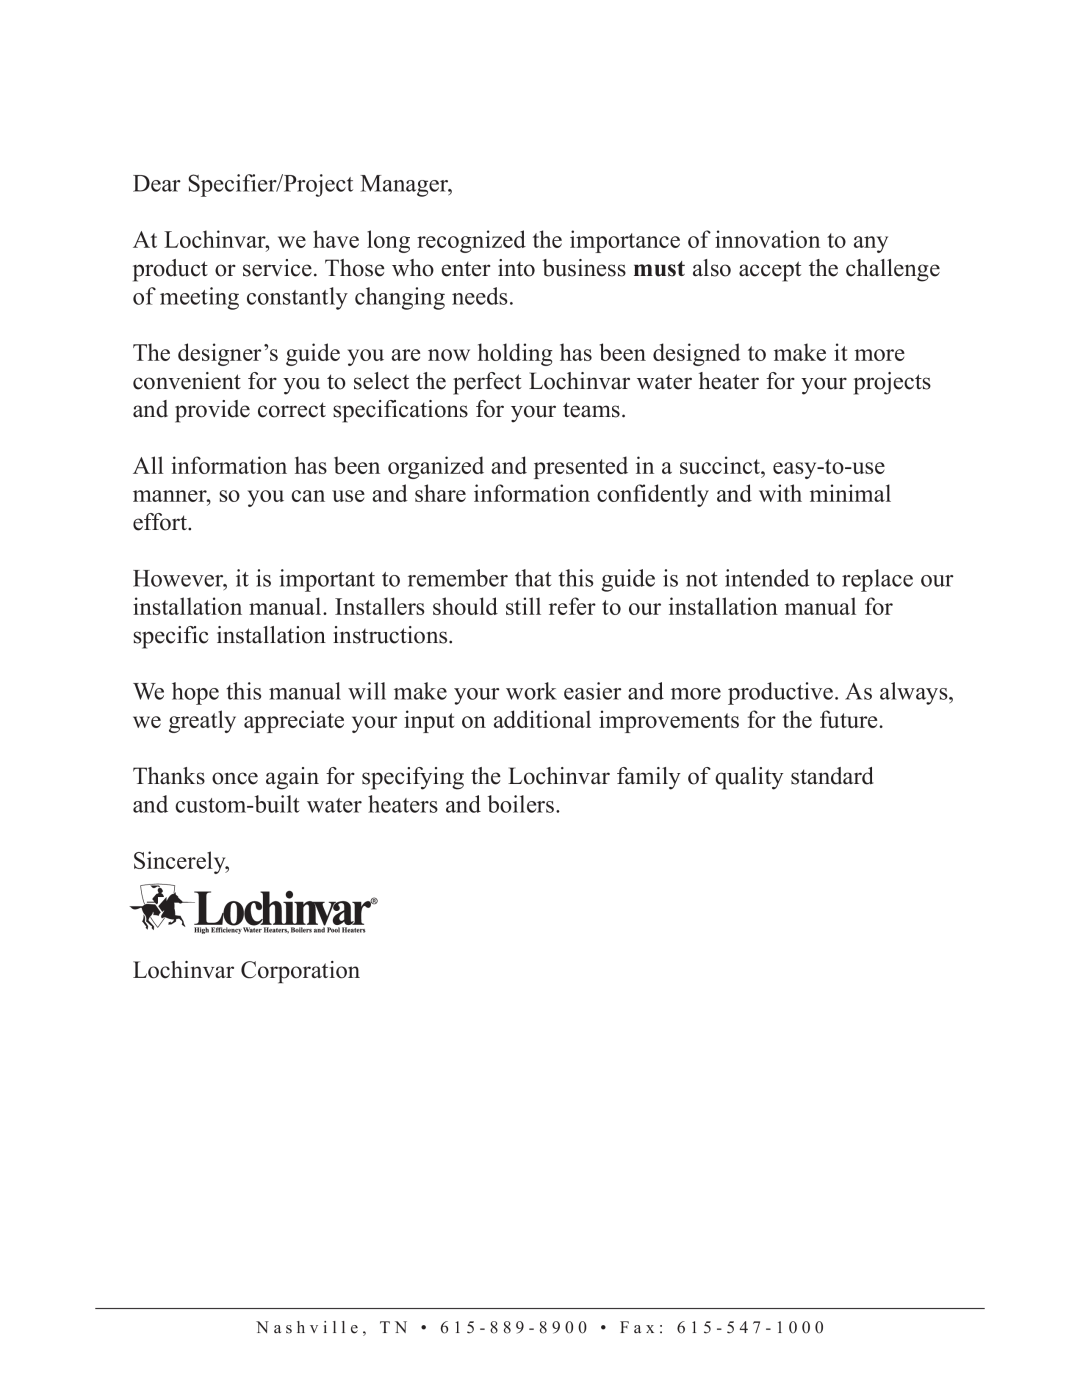 Lochinvar CW 745, CW 645 manual Dear Specifier/Project Manager 